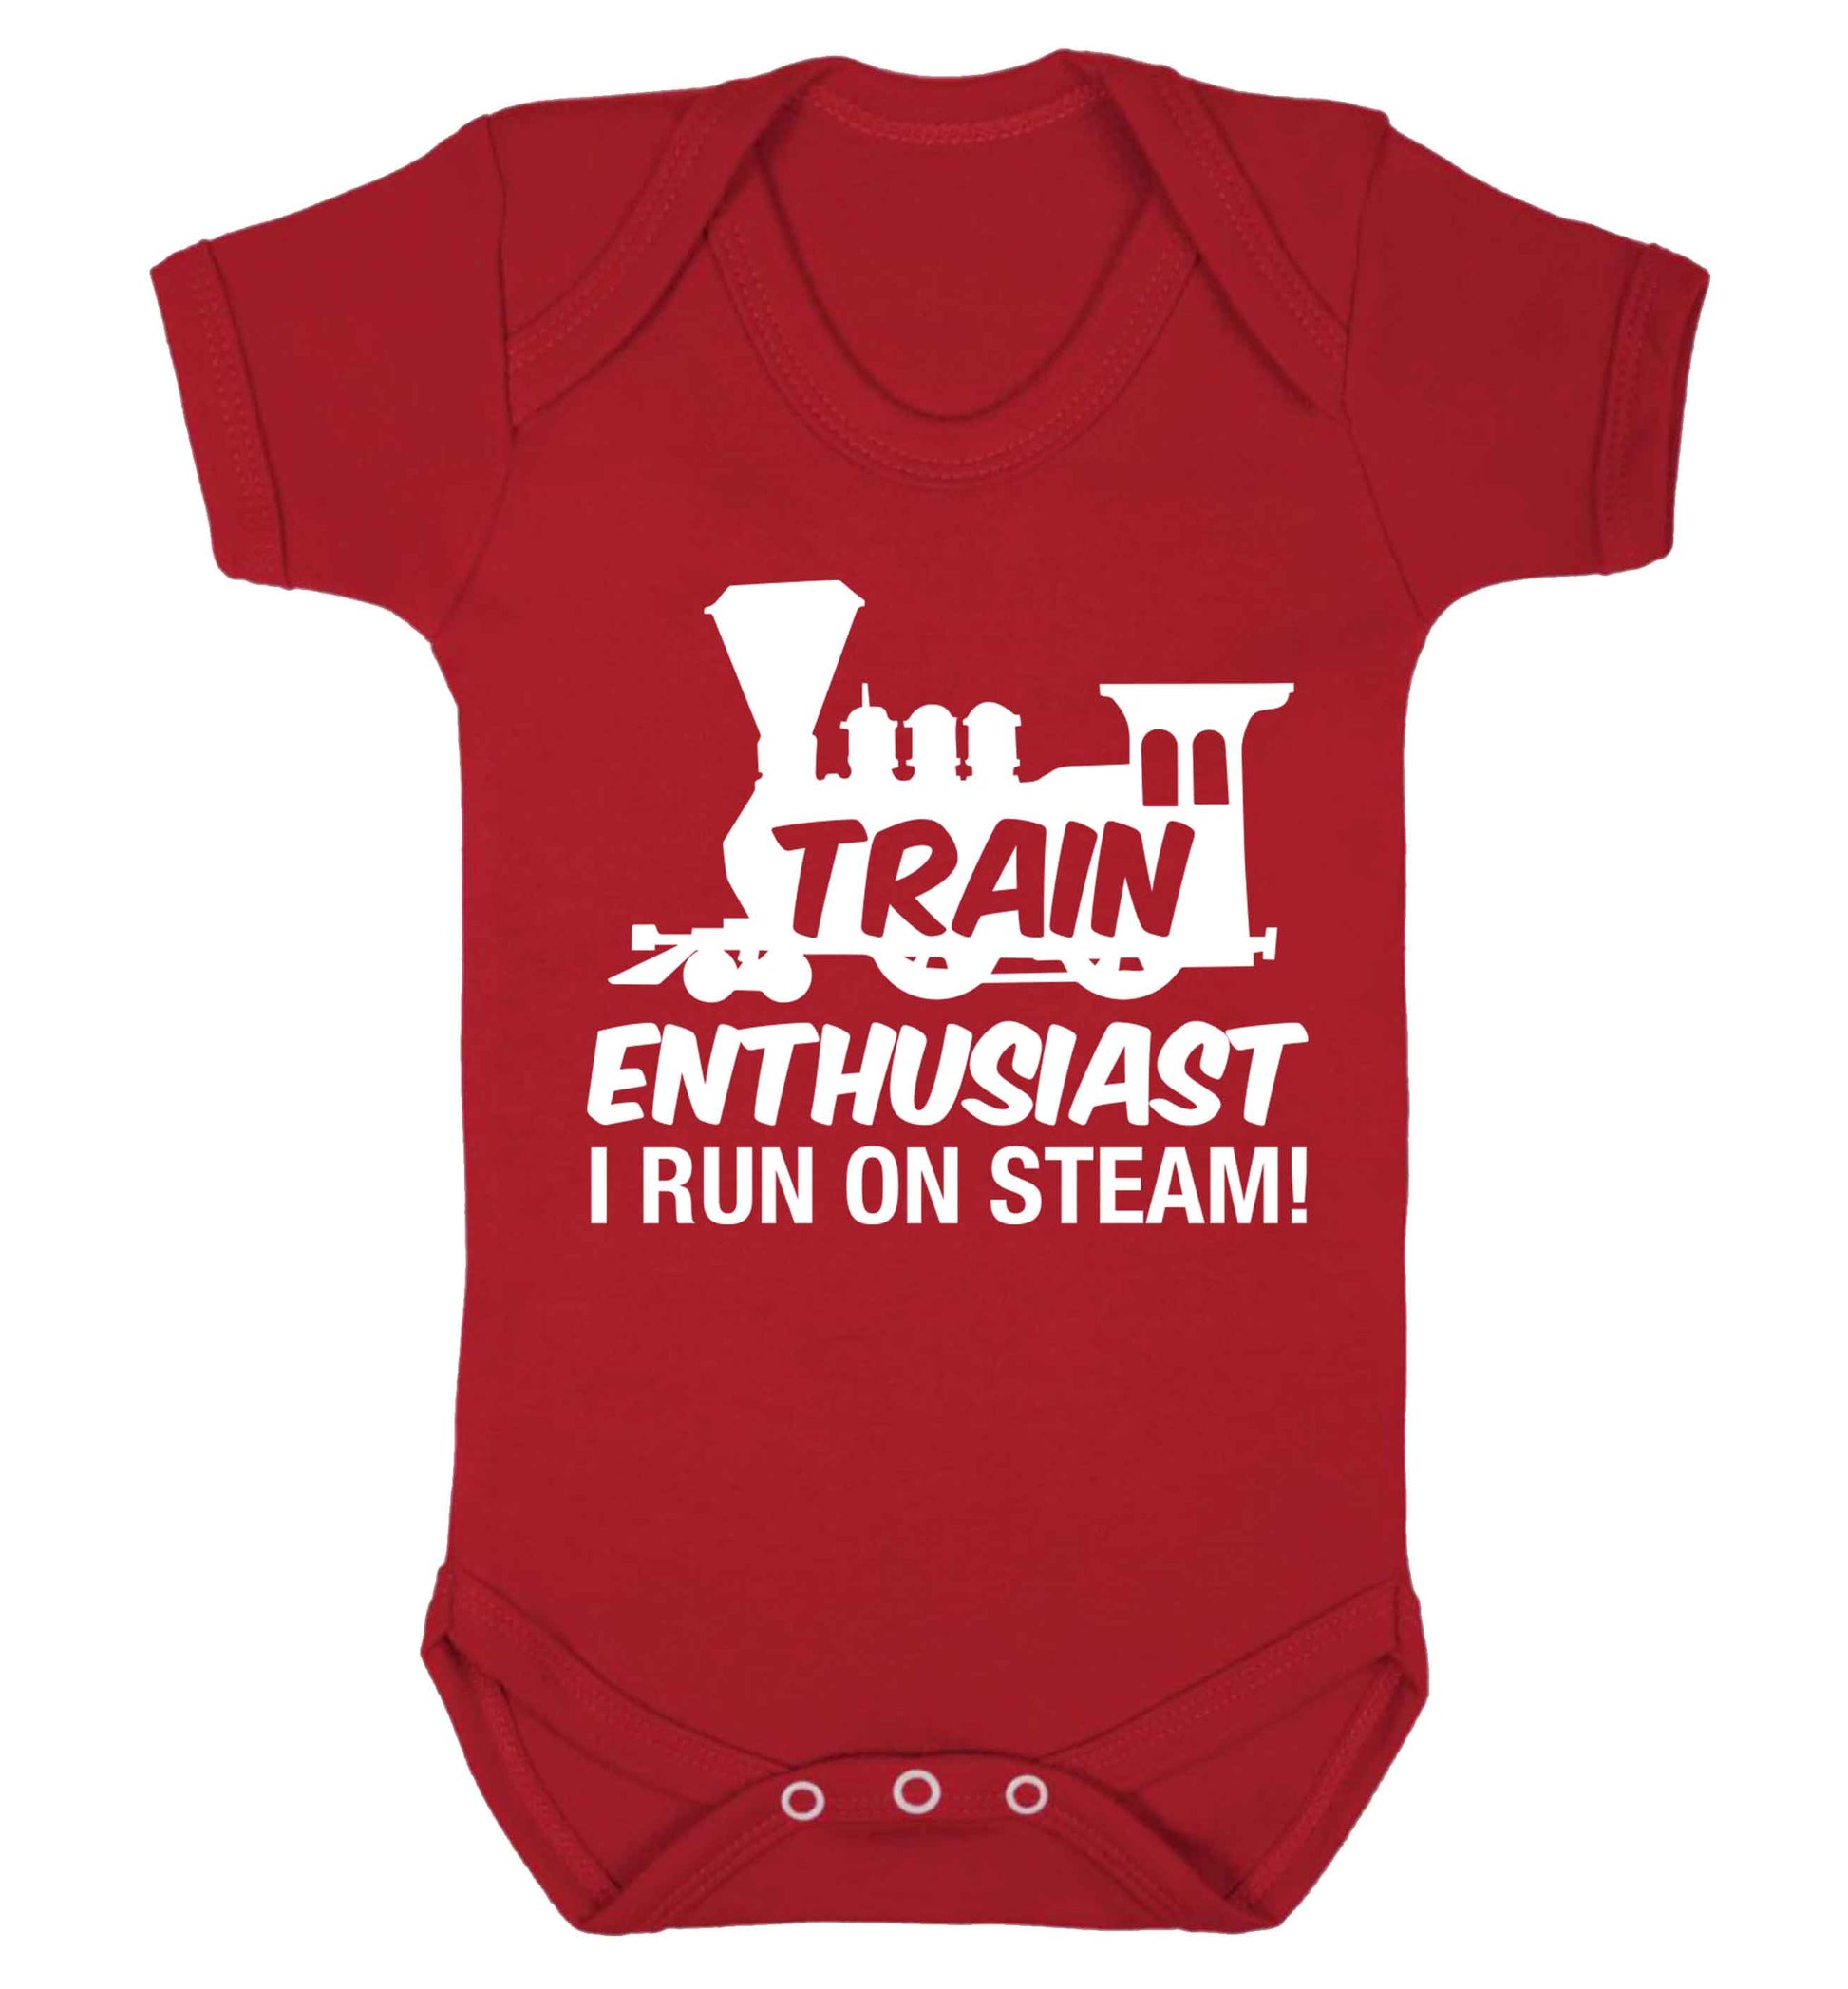 Train enthusiast I run on steam Baby Vest red 18-24 months